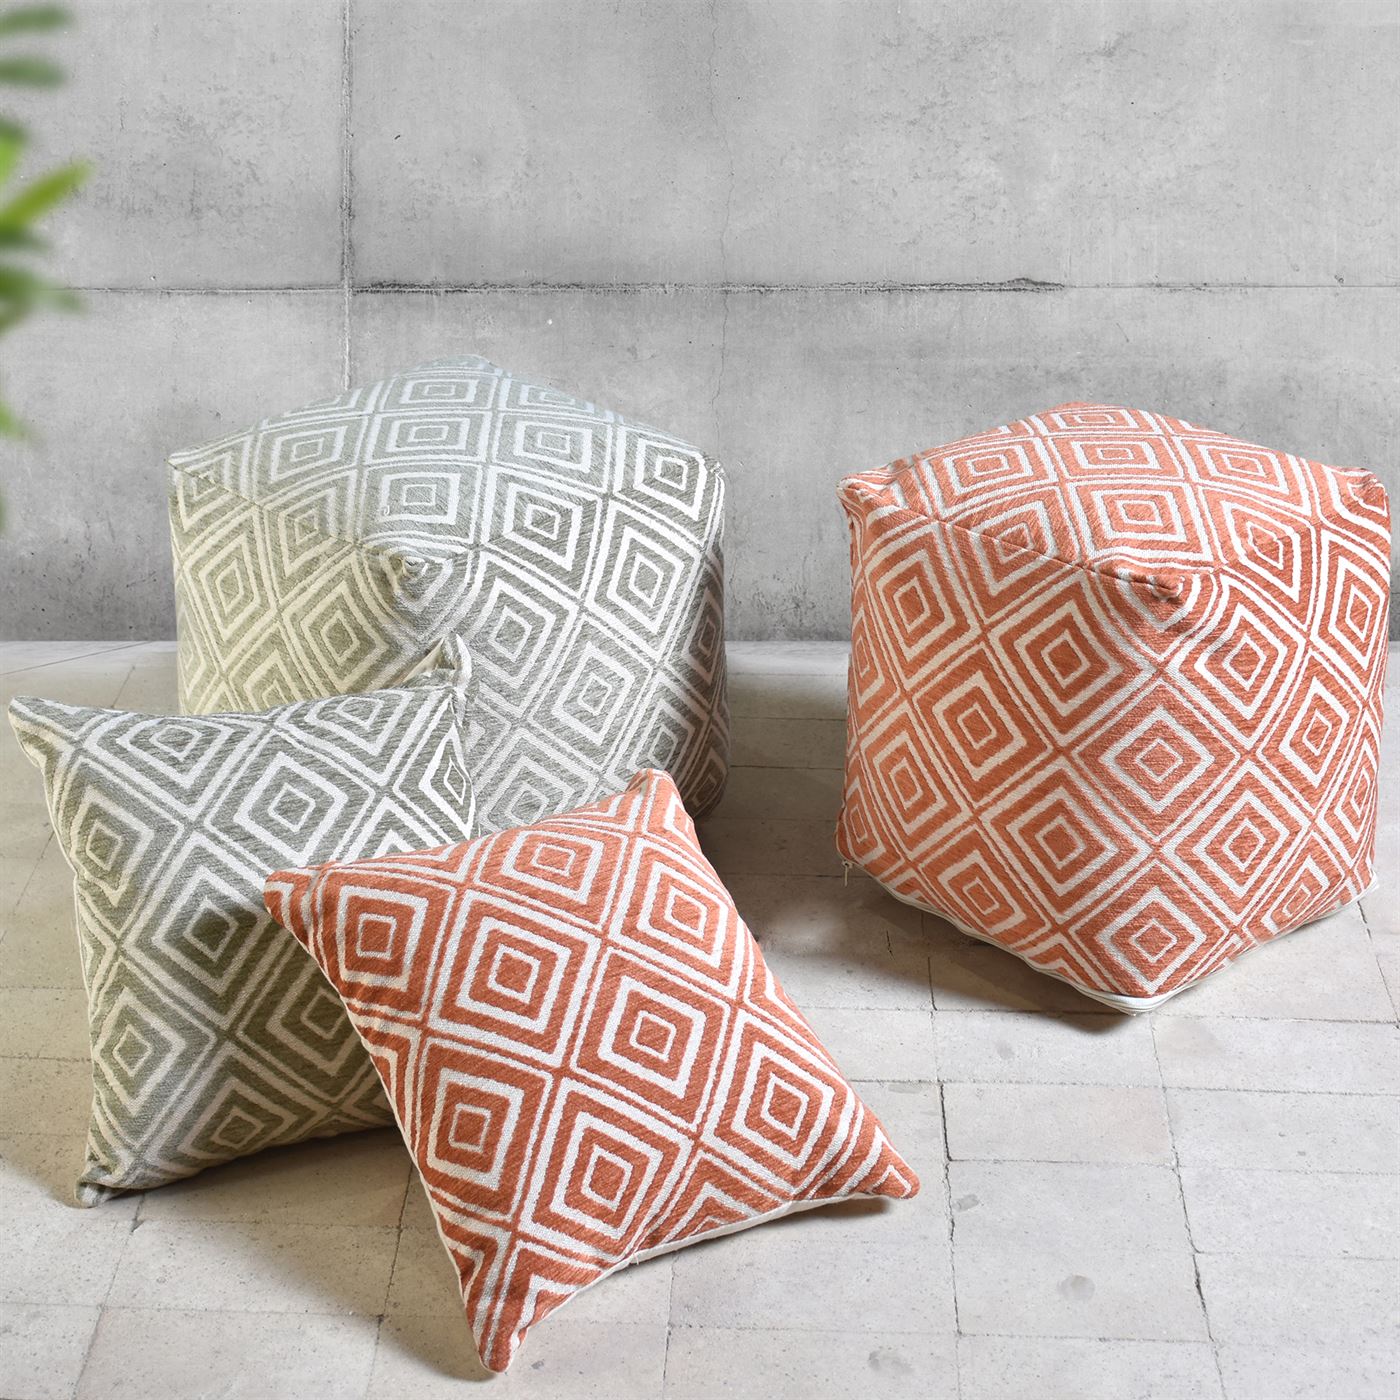 Dauria Pillow, Cotton, Acrylic, Polyester, Jaquard Durry, Flat Weave